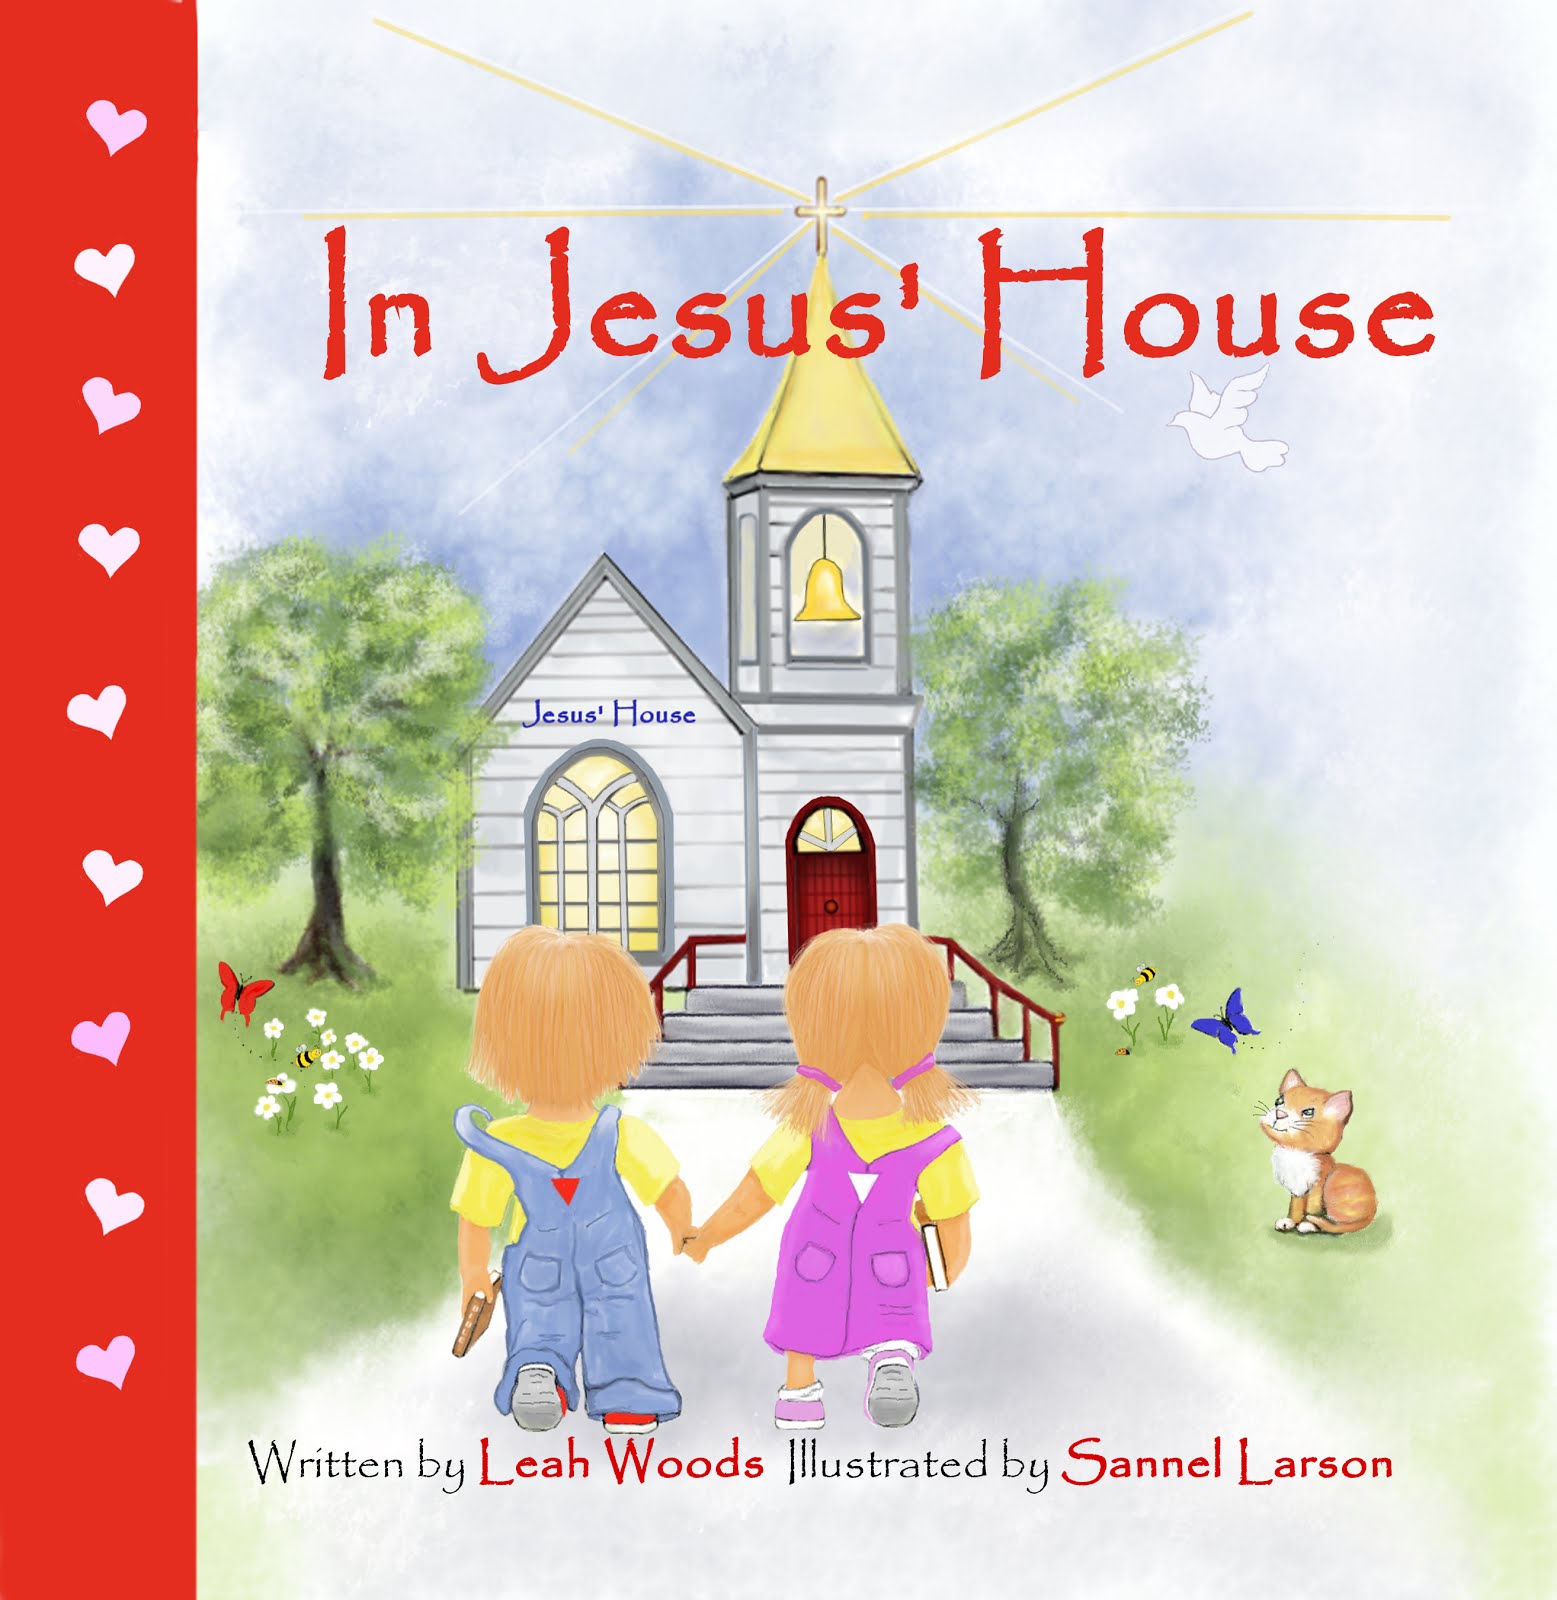 In Jesus' House by Christian author, Leah Woods, illustrated by Sannel Larson